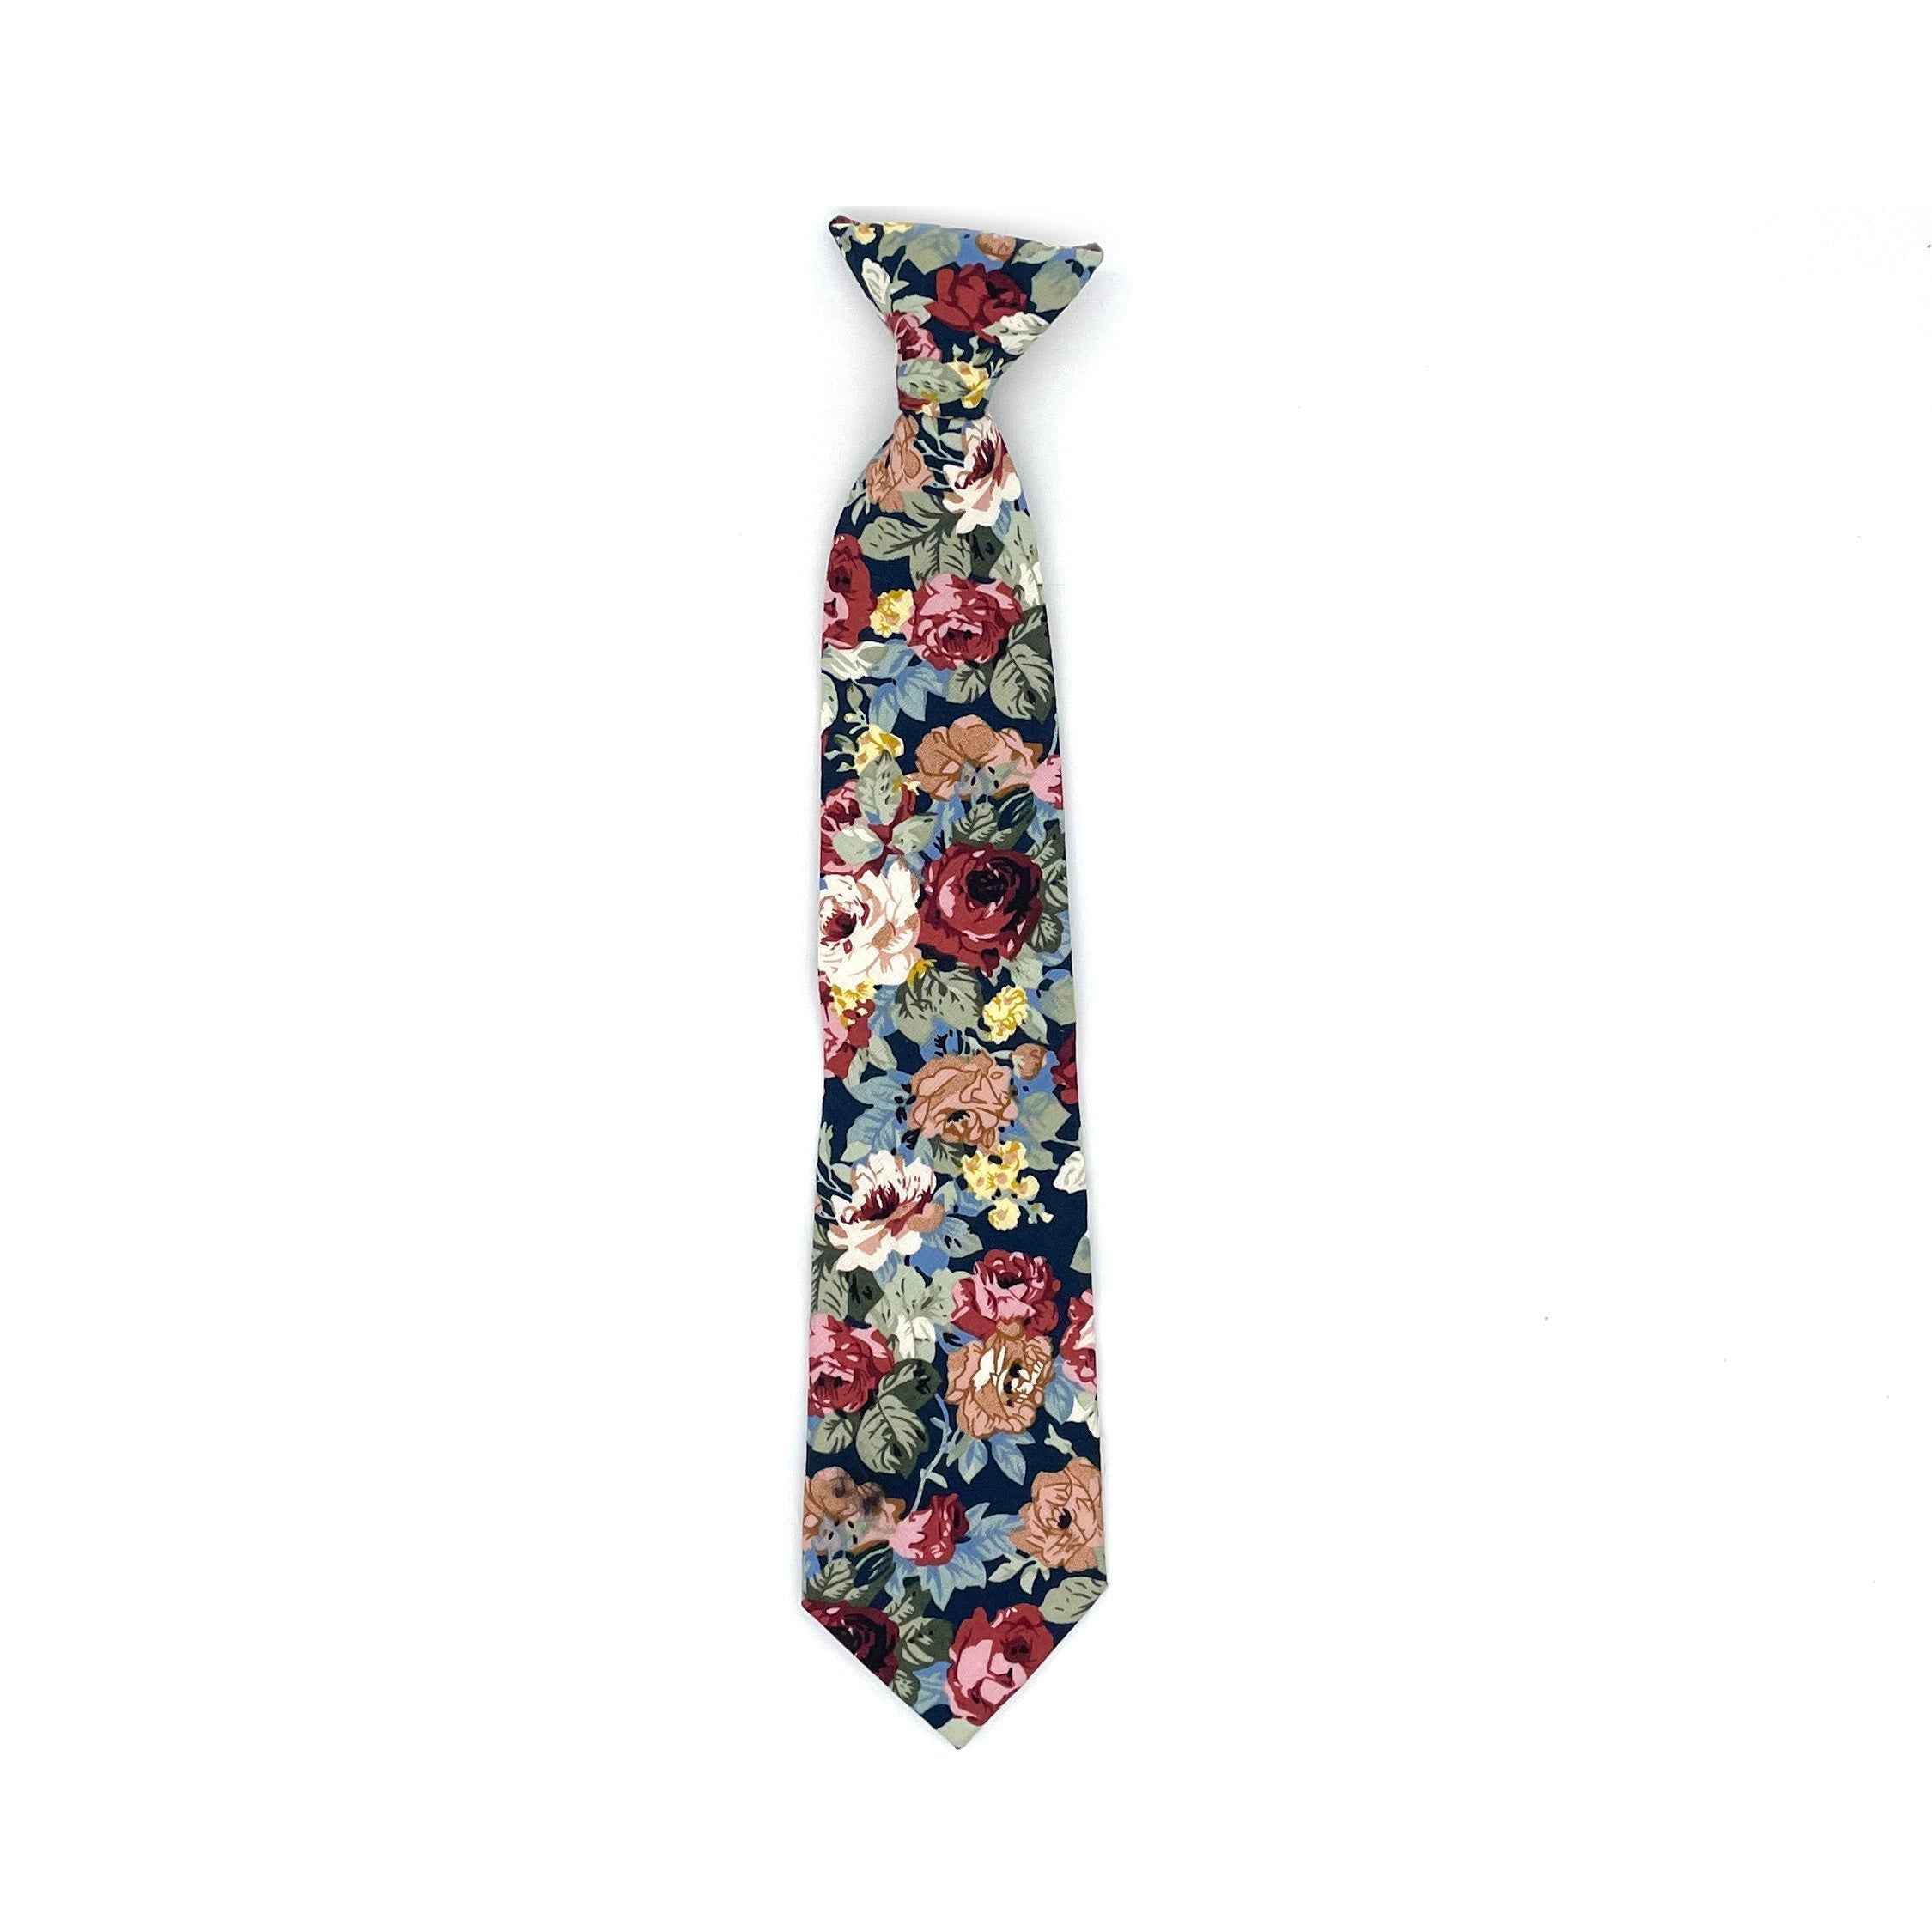 Blue Floral Boys Floral Clip On Tie 2.36 by Mytieshop - EVANDER-Blue Floral Boys Floral Clip On Tie Material: Cotton Blend Approx Size: Color: Blue Max width: 6.5 cm / 2.4 inches Available sizes: 2-5 years 31 CM Great for Prom Dinners Interviews Photo shoots Photo sessions Dates Wedding Attendant Ring Bearers tie. Fits boys and kids. bow tie floral for wedding and events groom groomsmen flower bow tie mytieshop ring bearer page boy bow tie white bow tie white and blue tie kids bowtie floral boys